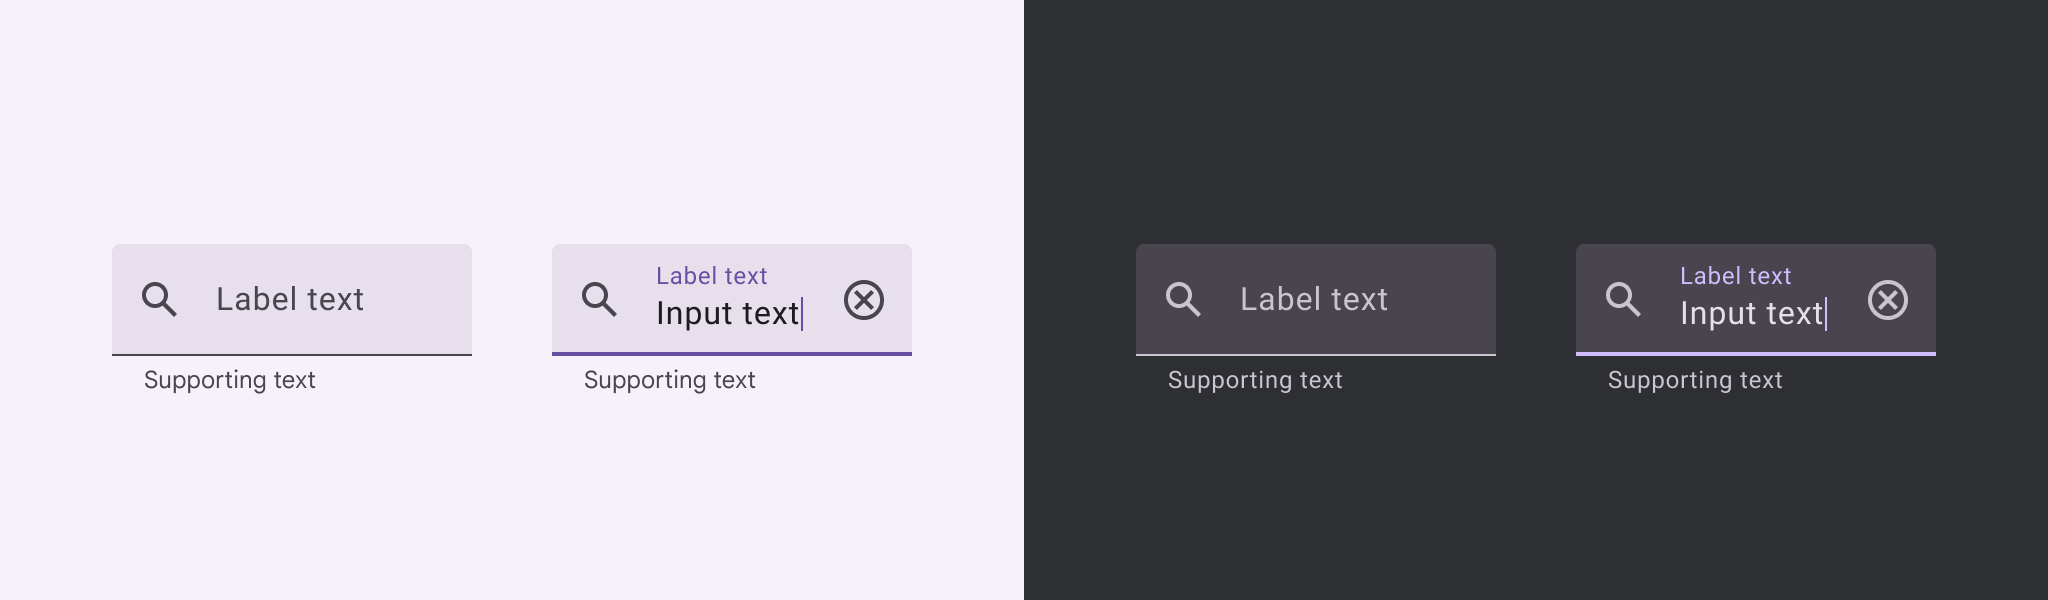 Filled text field